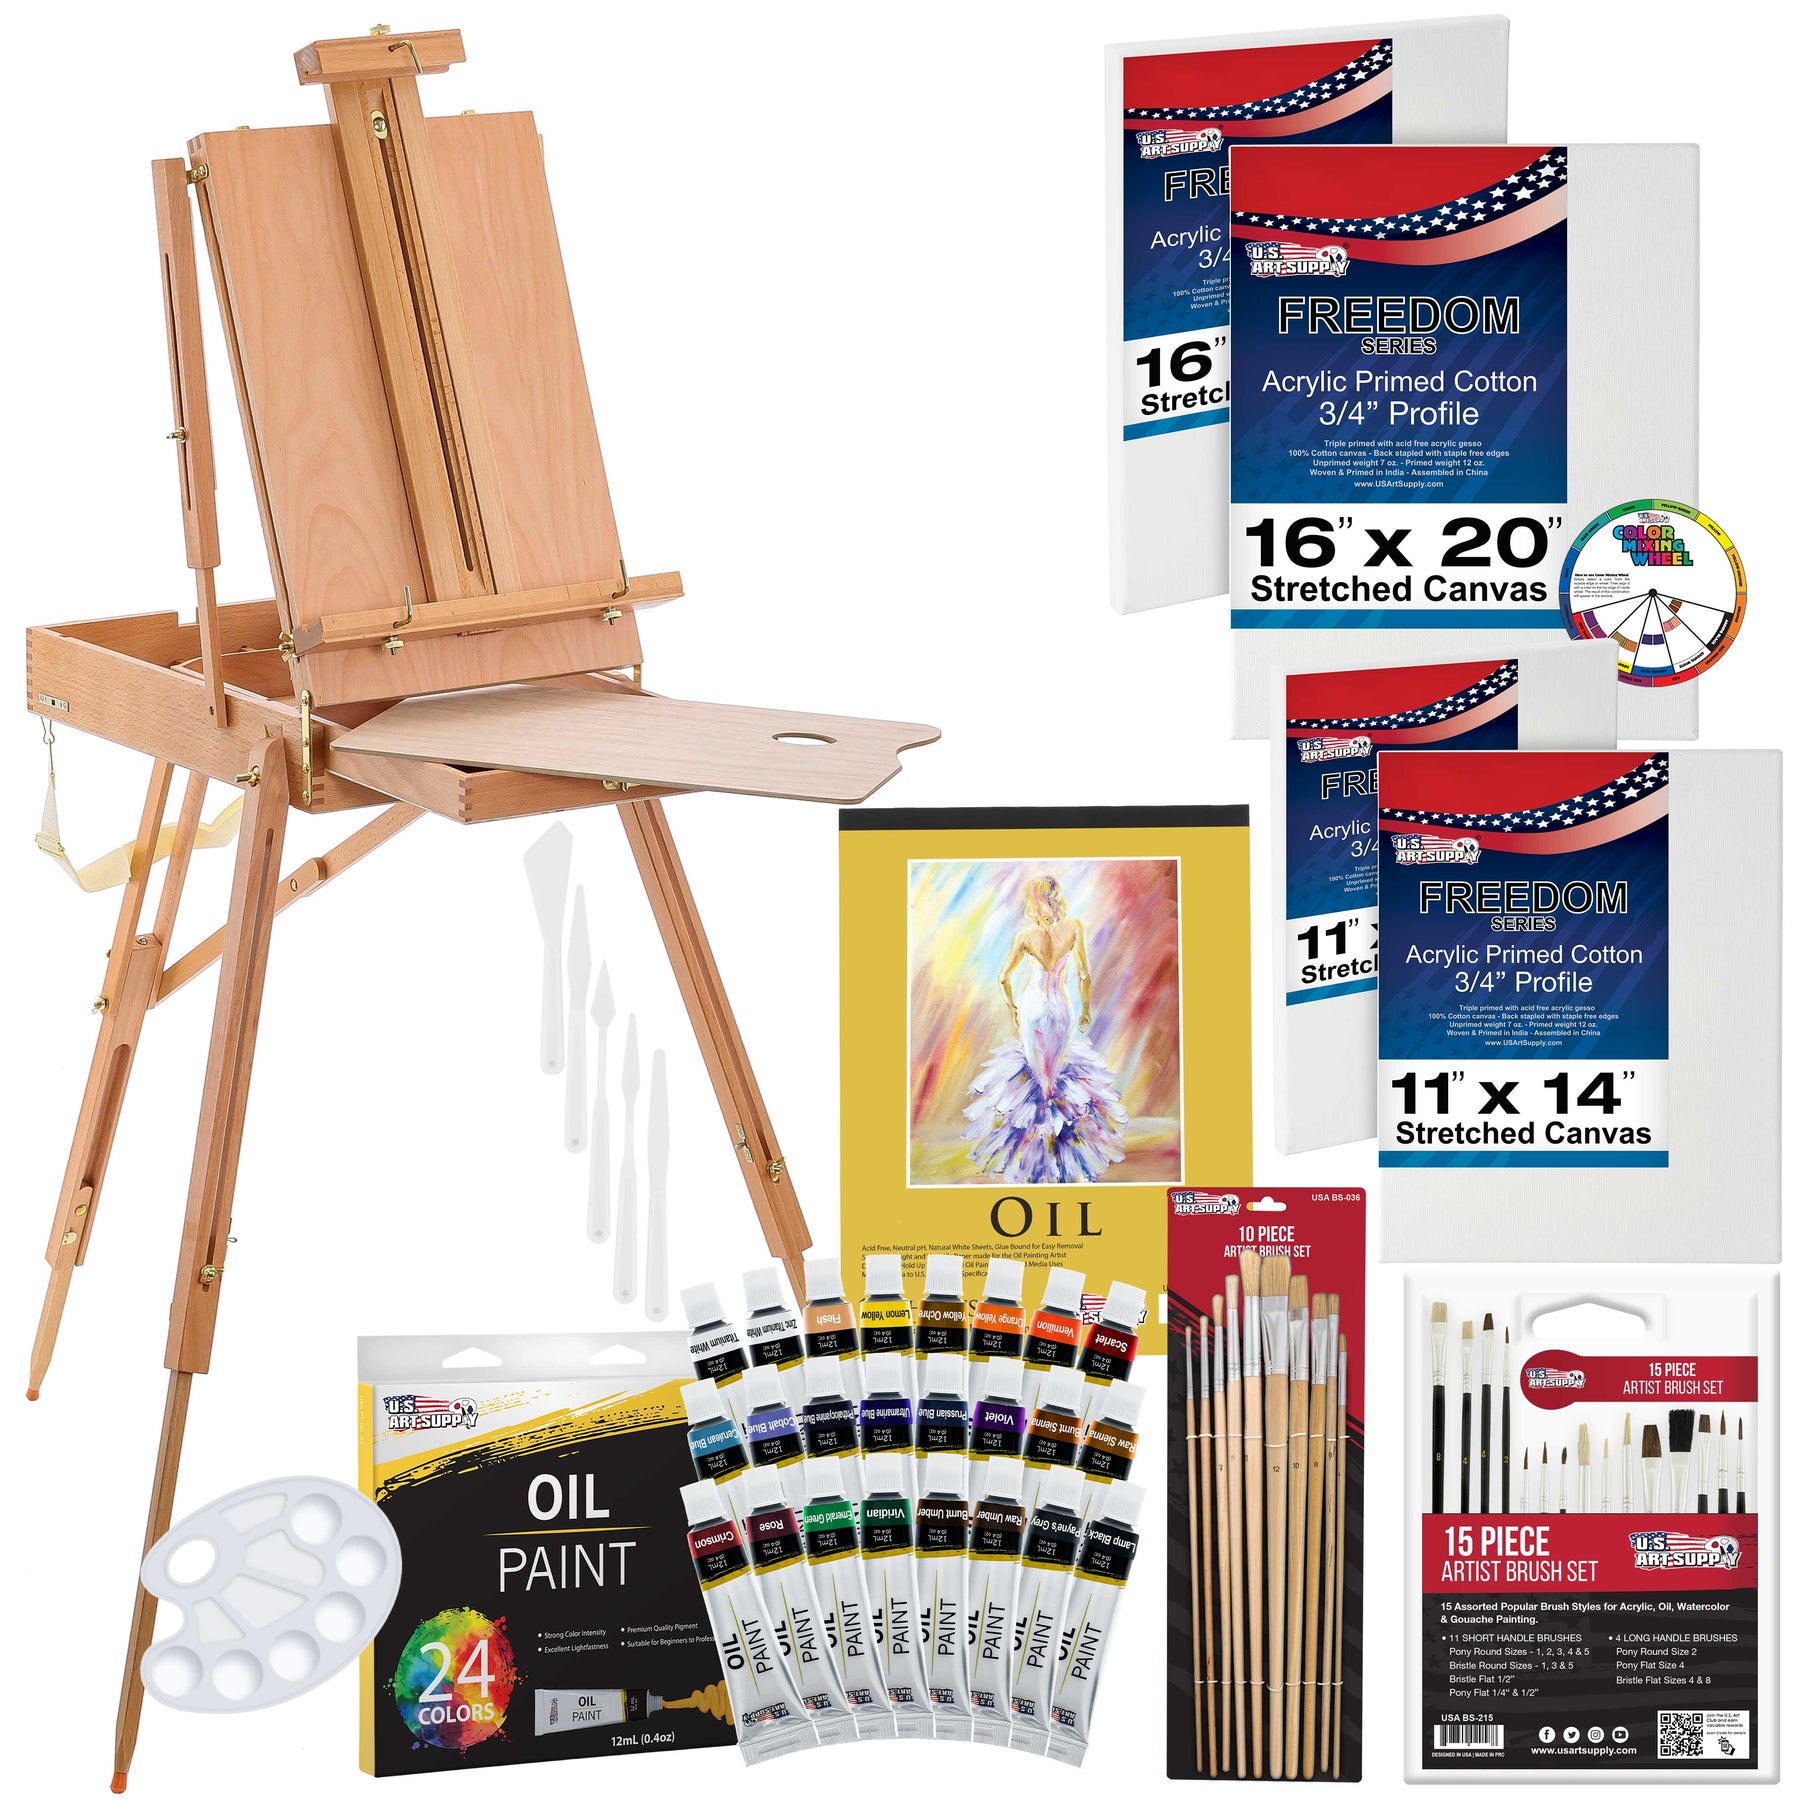 U.S. Art Supply 13-Piece Artist Painting Set with 6 Vivid Acrylic Paint  Colors, 12 Easel, 2 Canvas Panels, 3 Brushes, Painting Palette - Fun